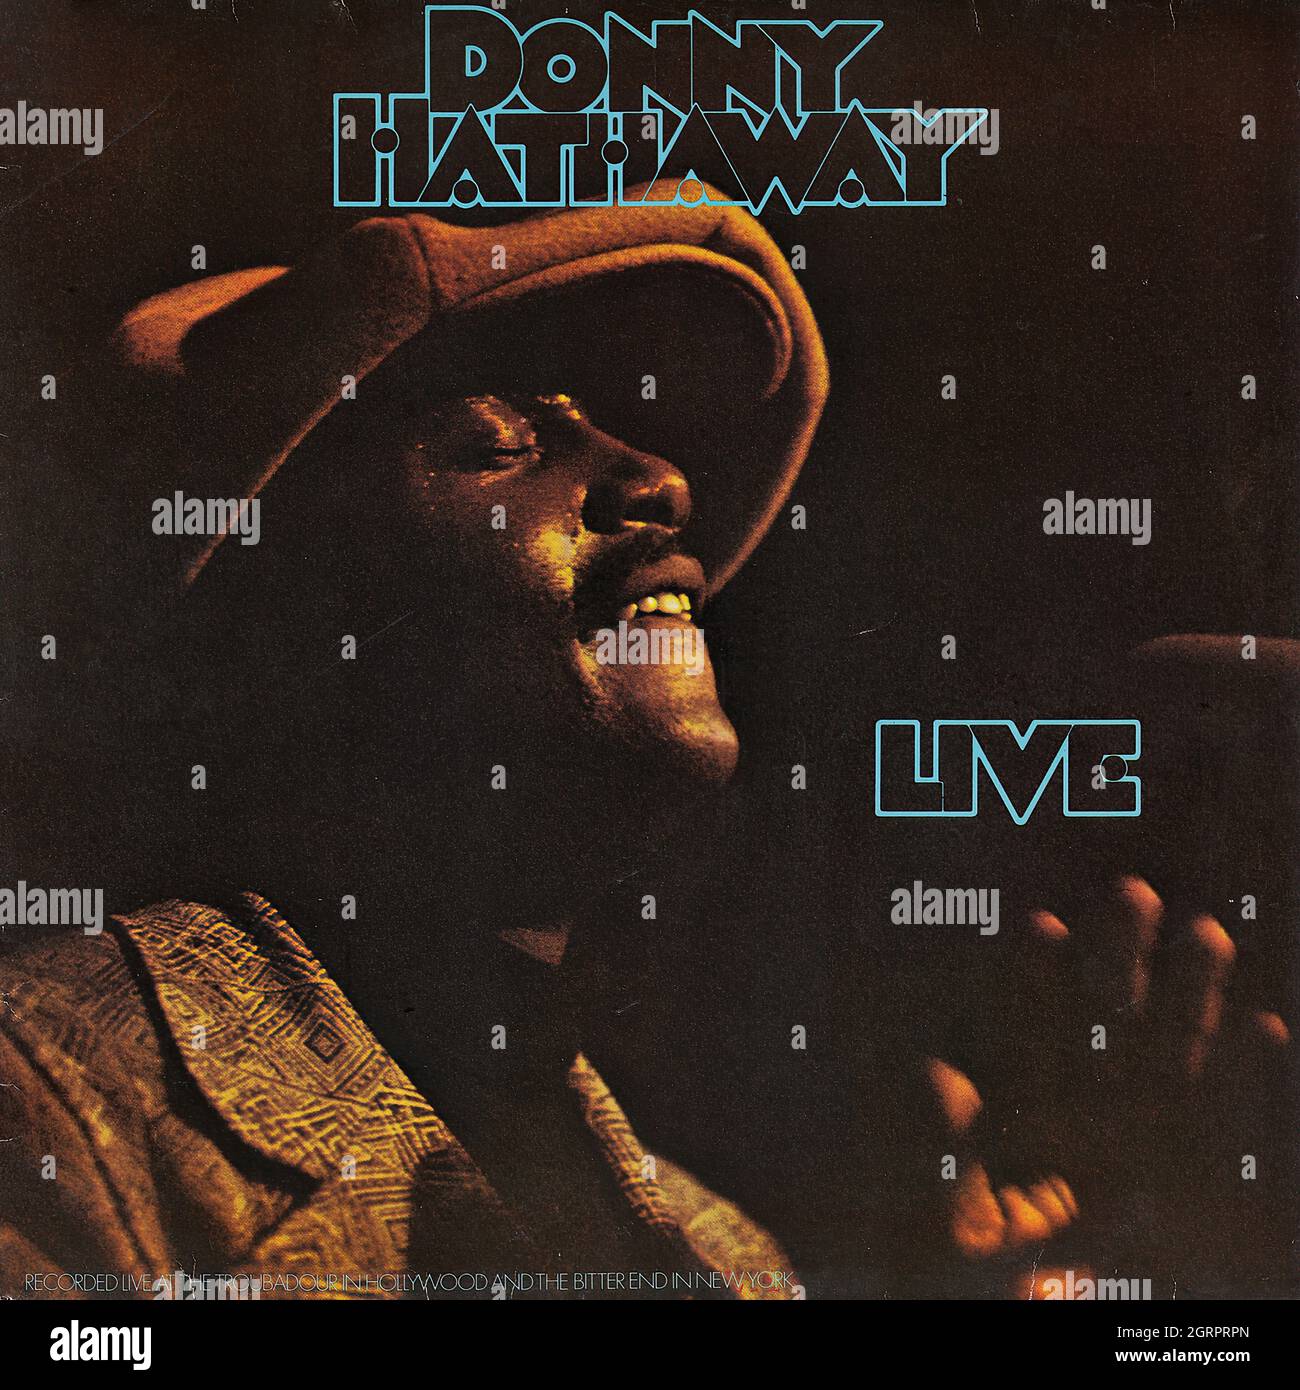 Donny Hathaway - Live - Vintage Vinyl Record Cover Stock Photo